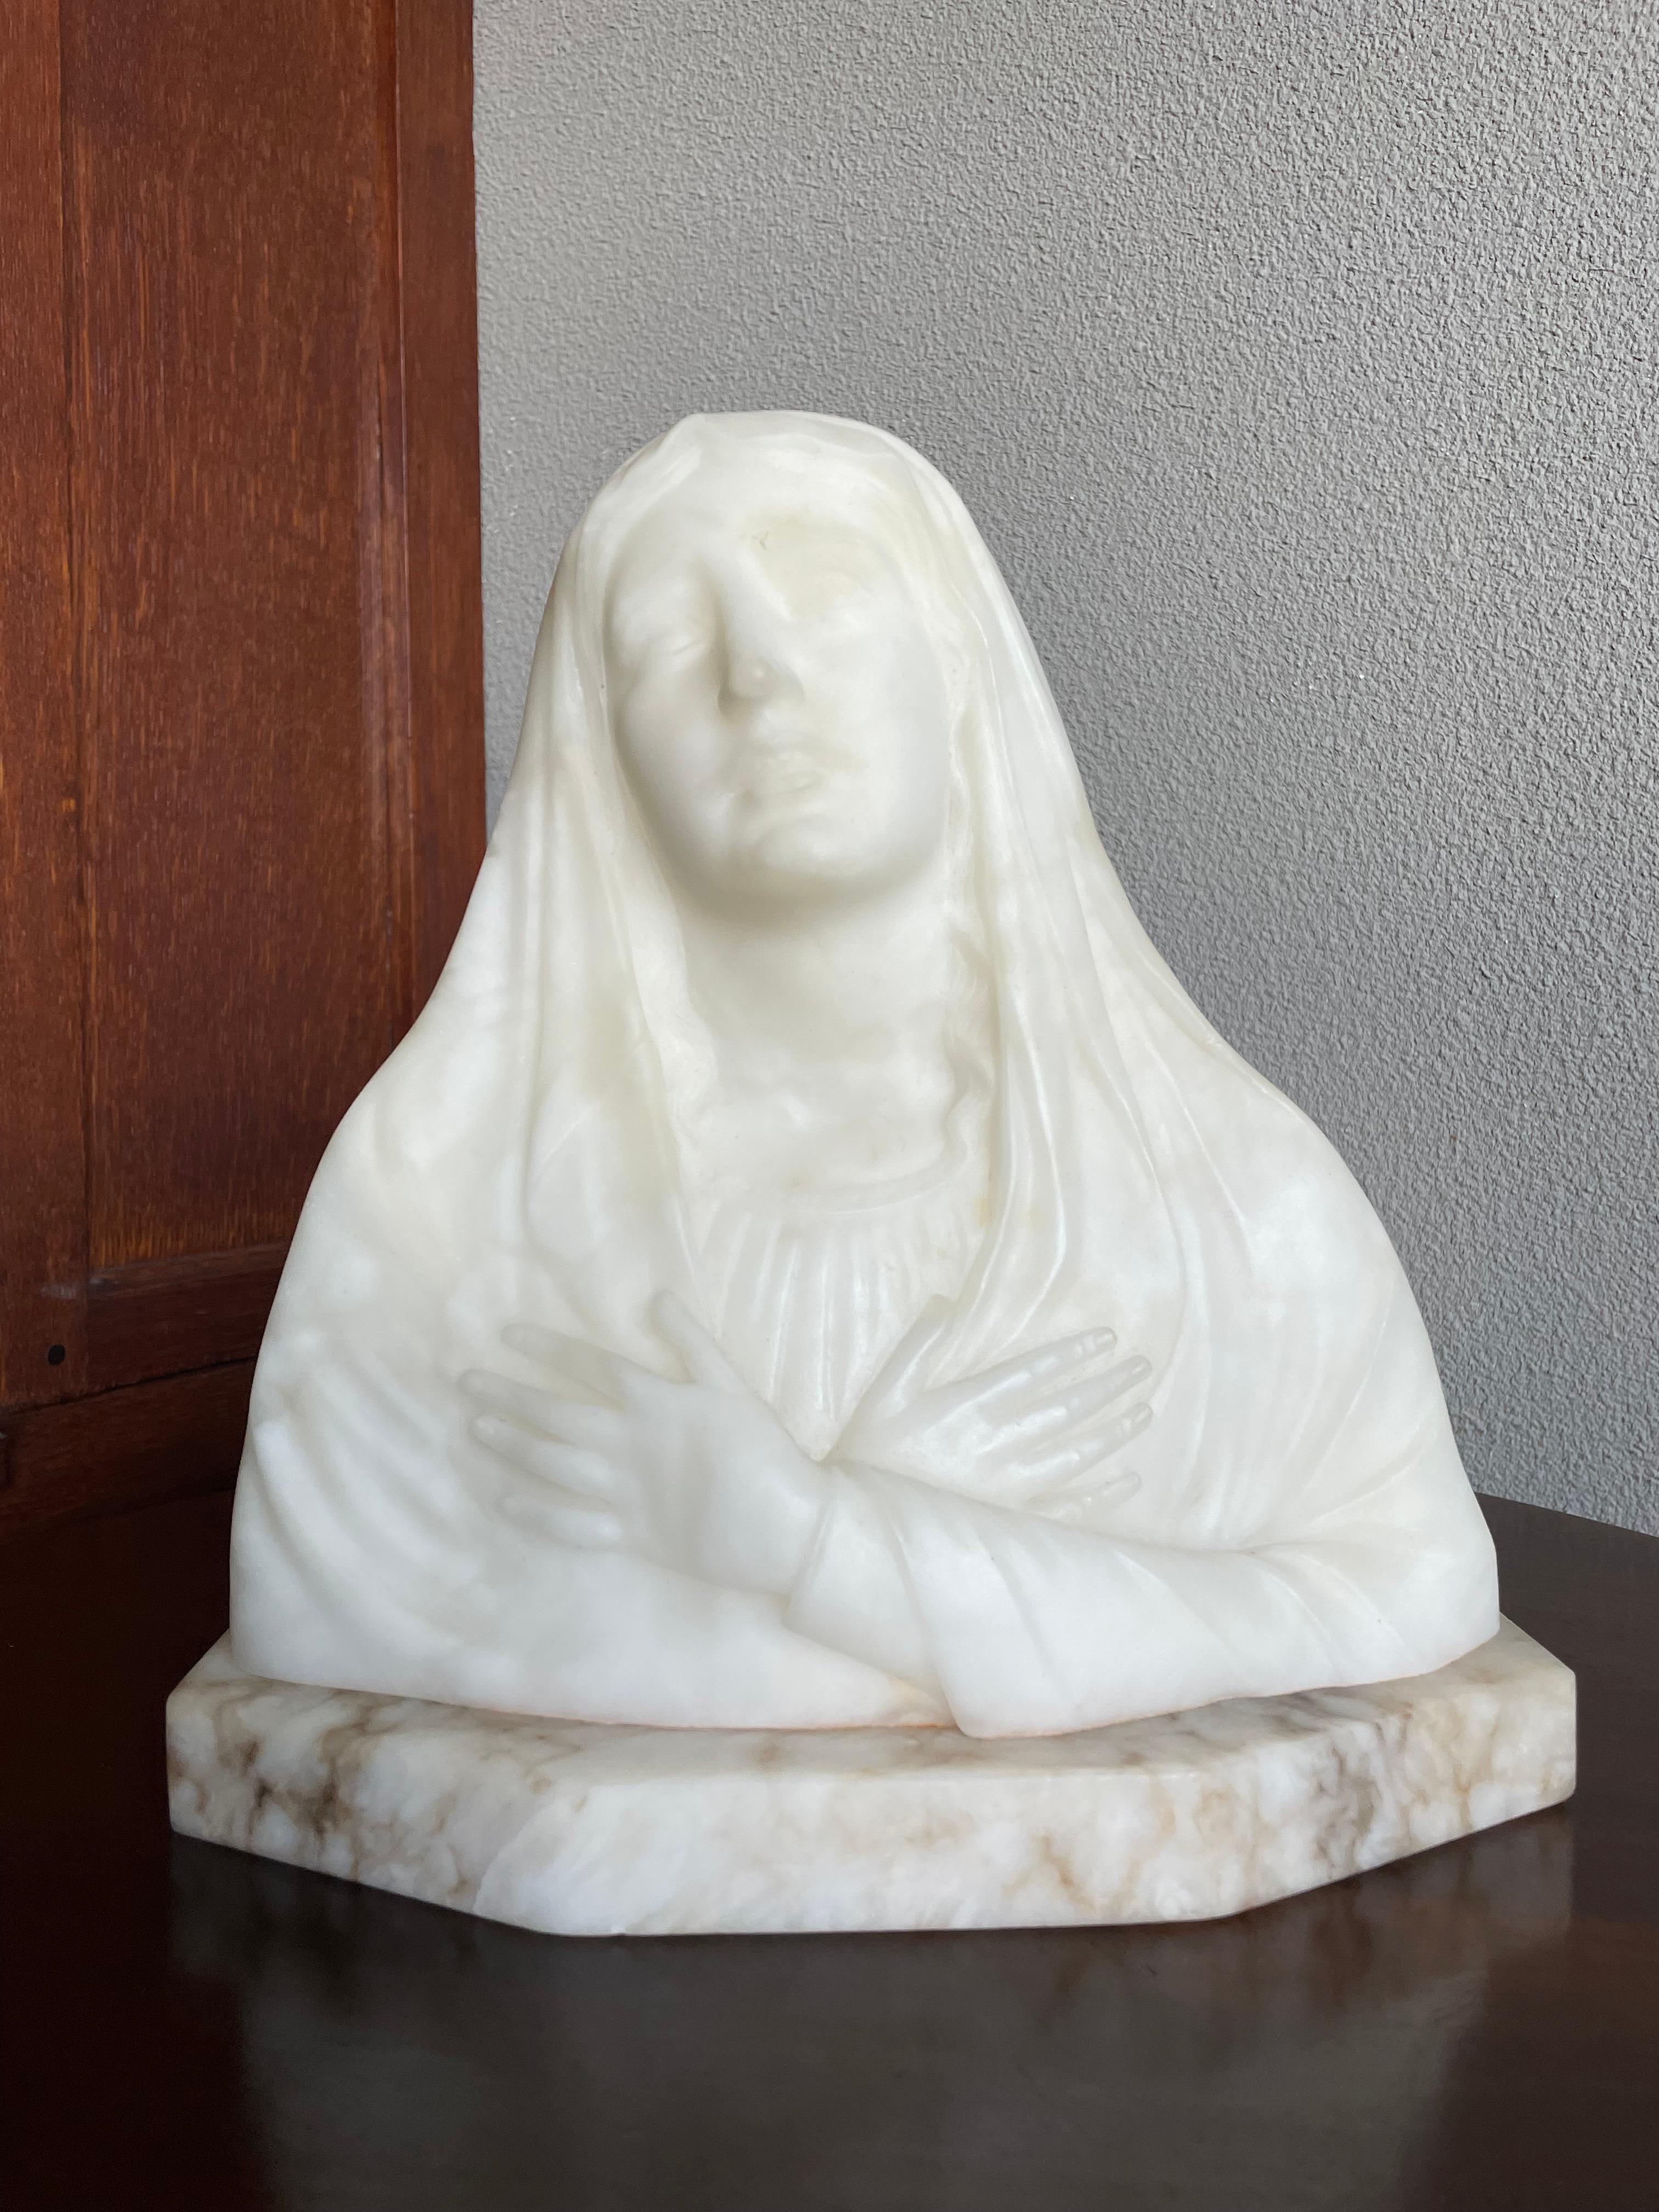 Mid size, finest quality carved alabaster Madonna sculpture on a marble base. 

If you are a collector of antique and finest quality religious artefacts then this hand carved Virgin Mary could be gracing your home or house of prayer soon. Judging